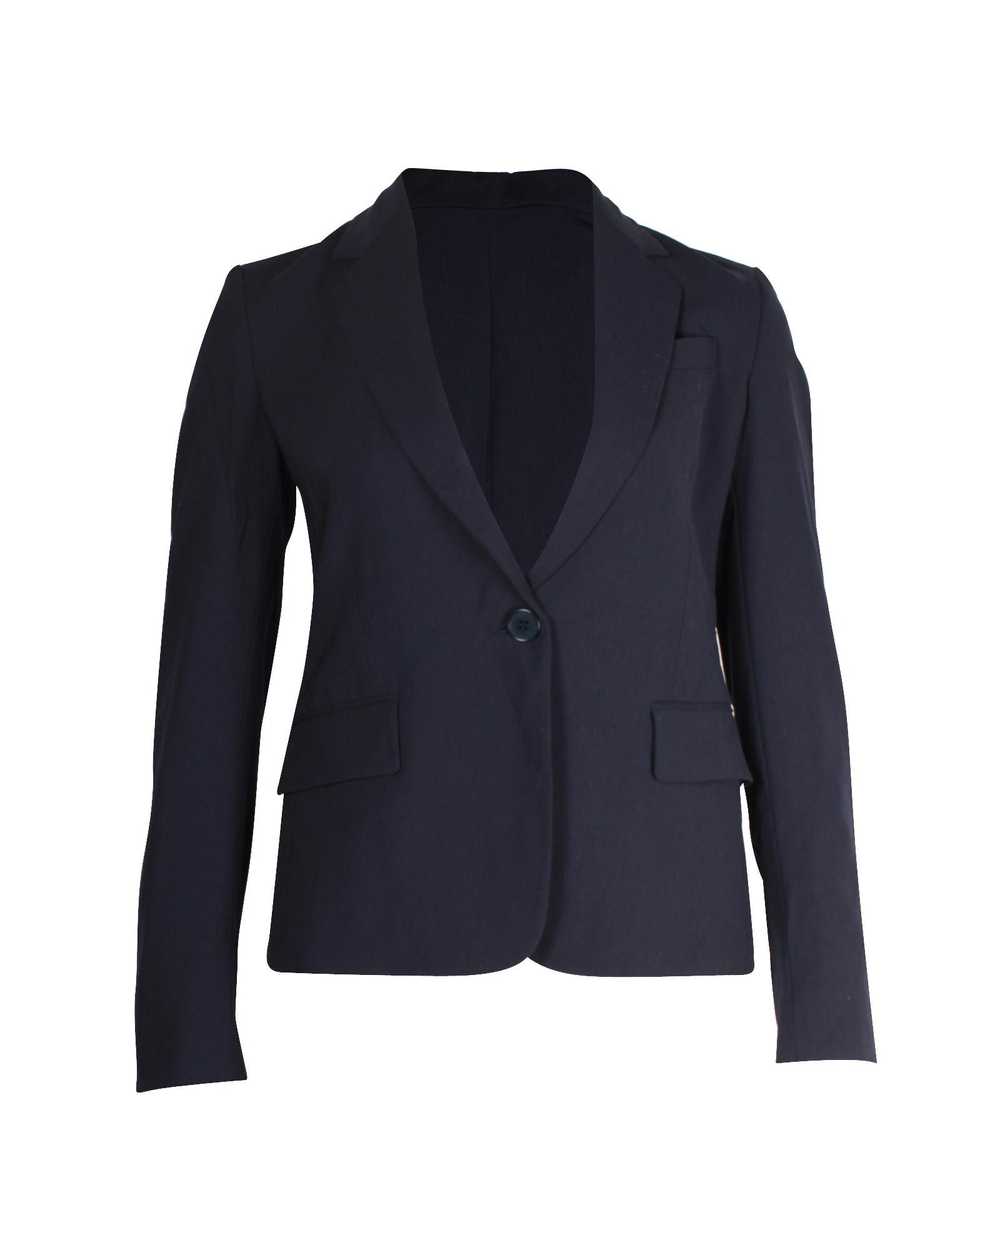 Theory Navy Blue Wool Single-Breasted Blazer - image 3